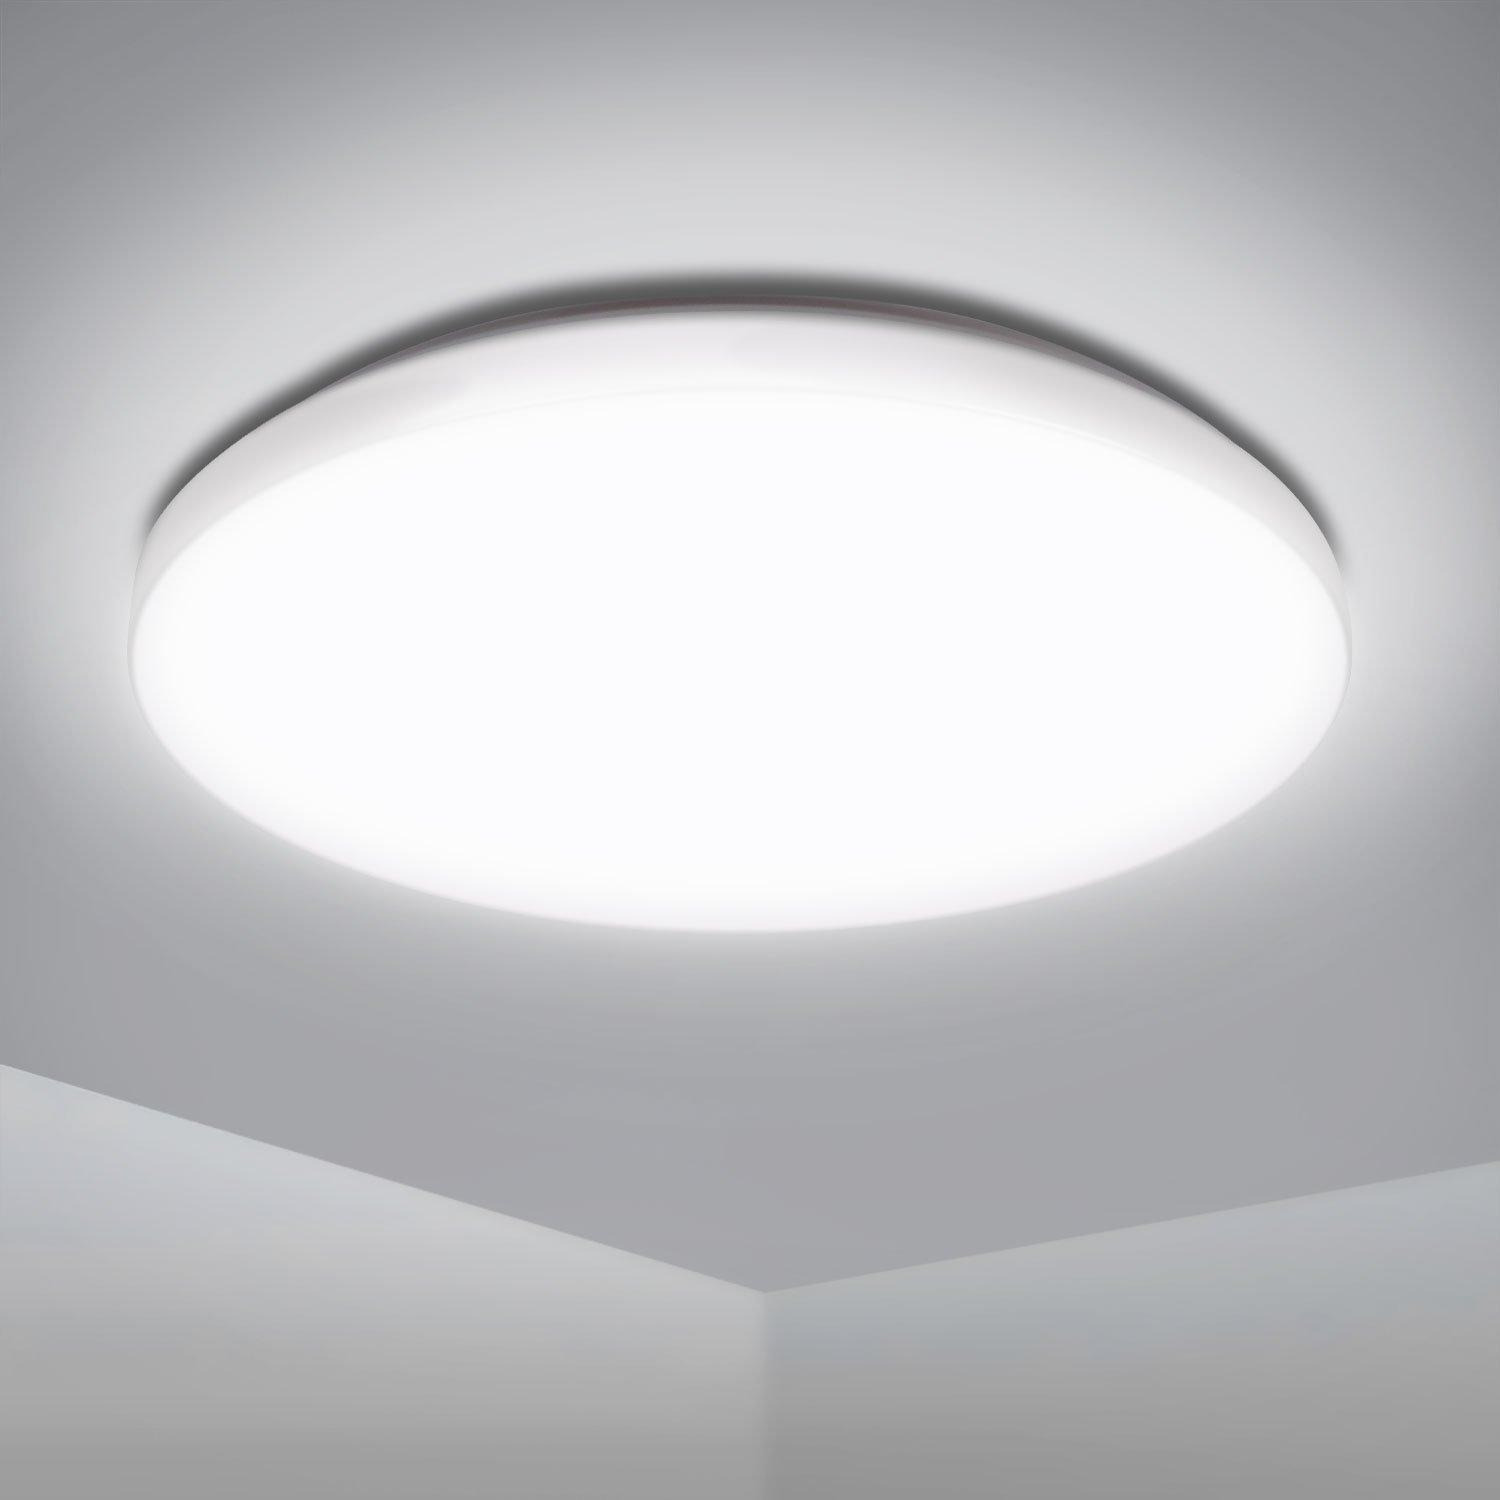 18W Bathroom LED round Surface Mount Integrated Ceiling Light Flush Light Cold White, Waterproof, IP54, 33cm (Dia) - image 1